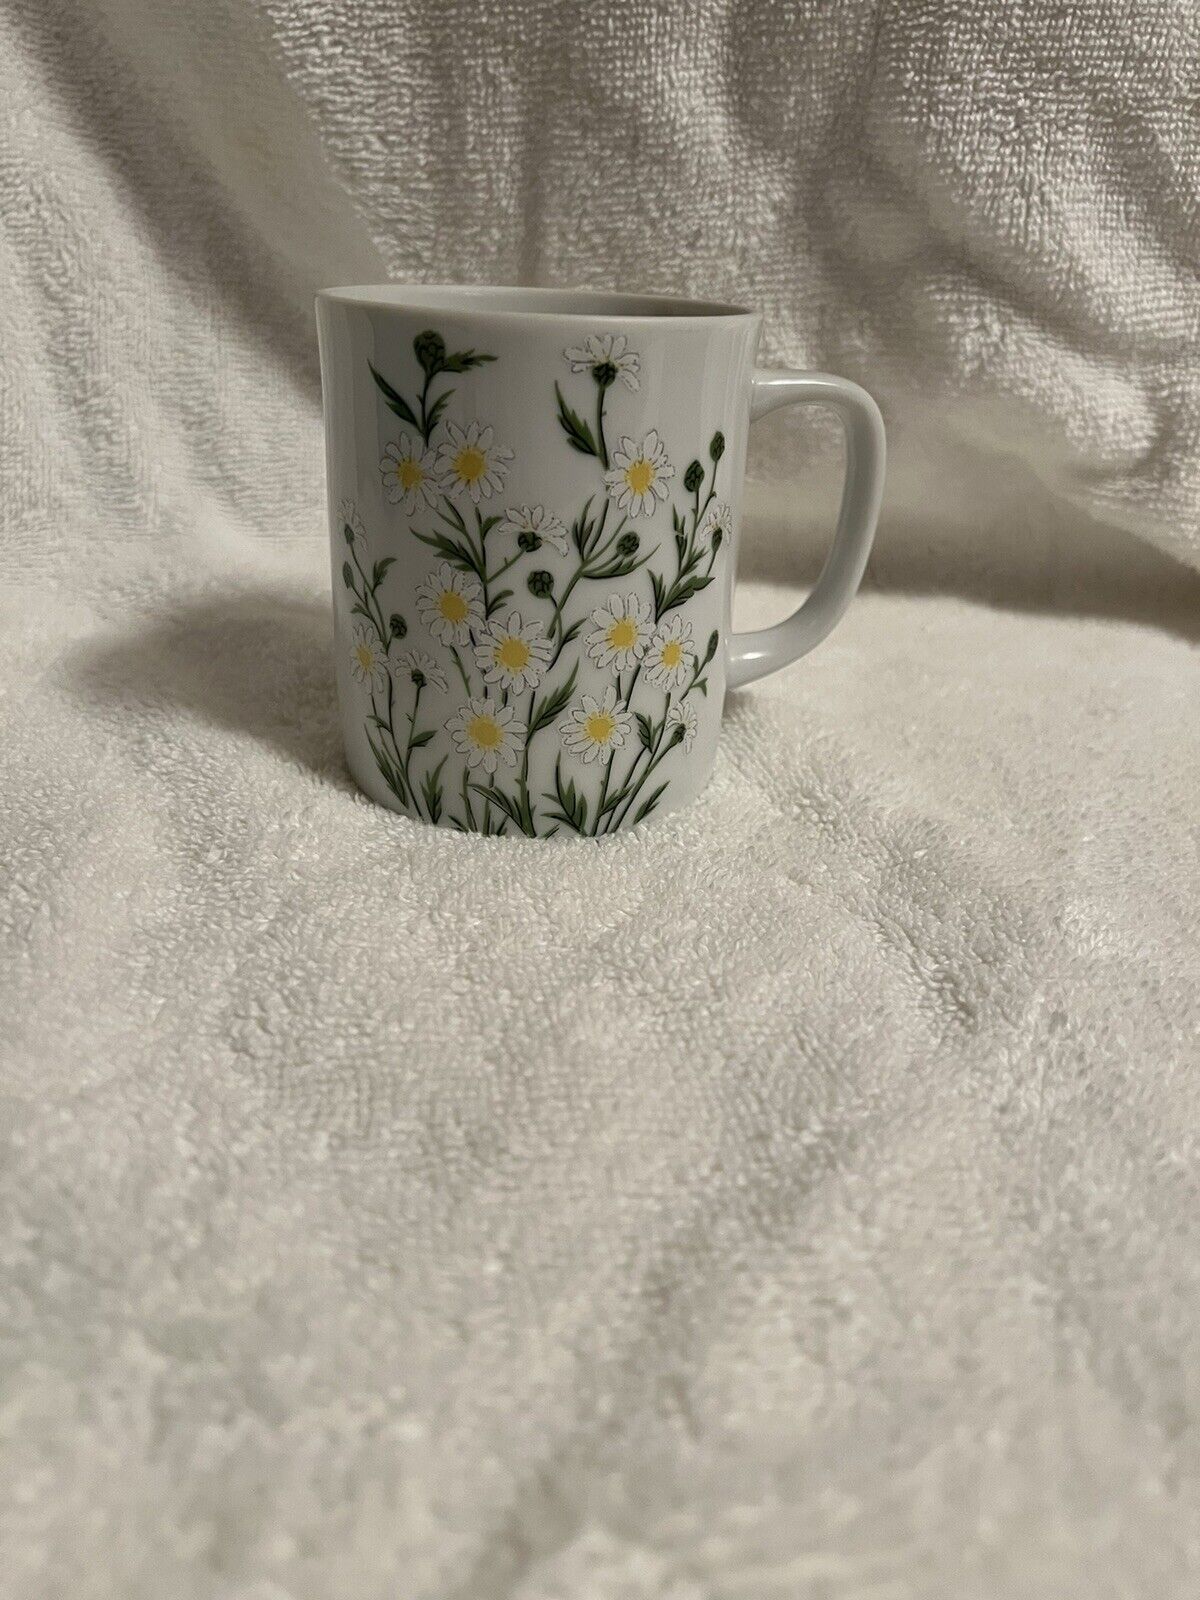 Vintage Wild Daisy Coffee Cup